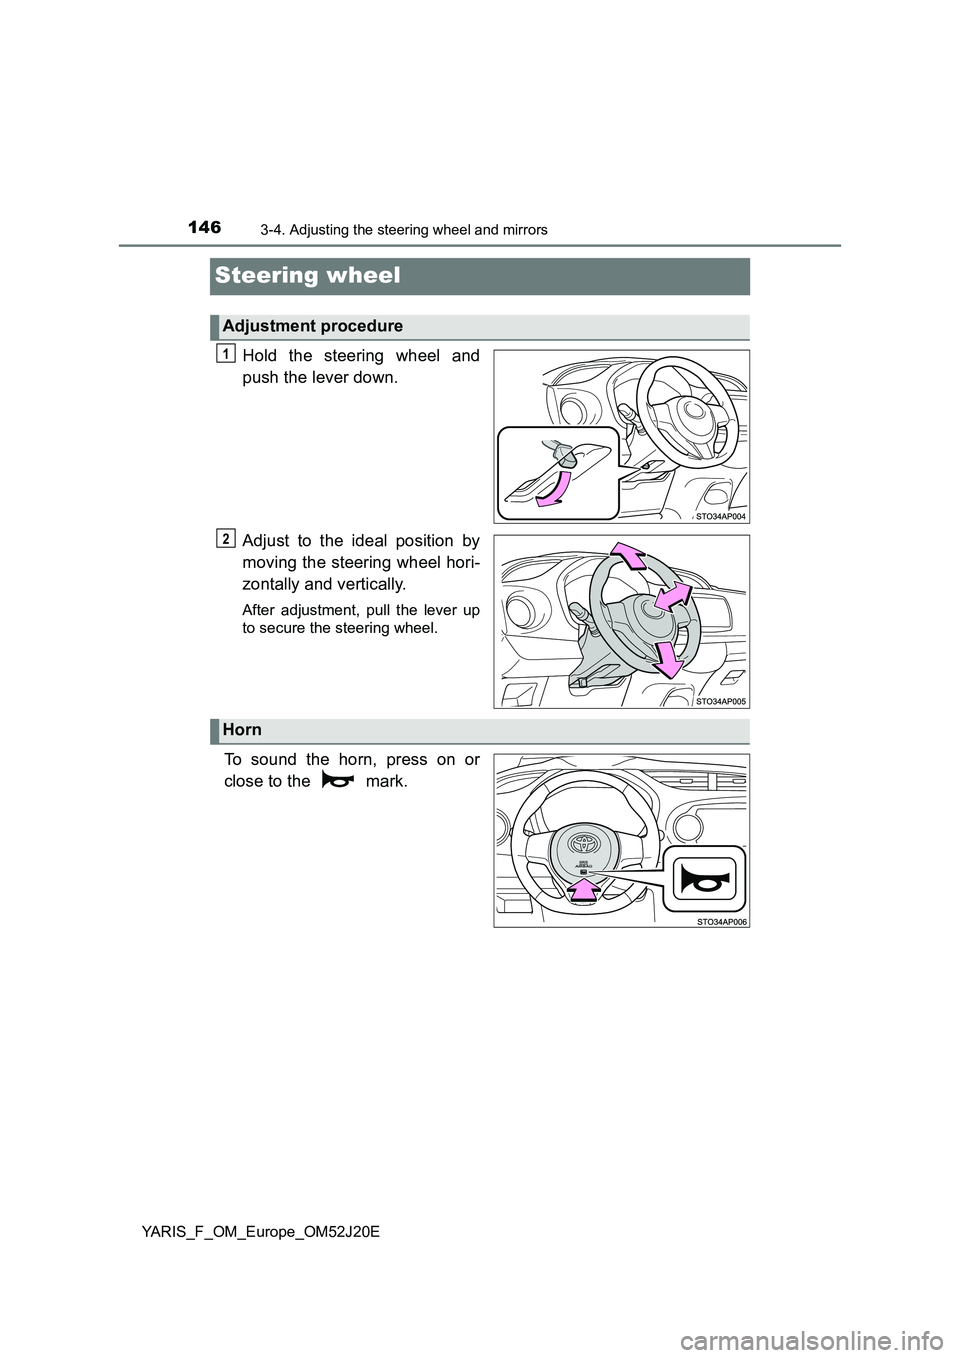 TOYOTA YARIS 2017  Owners Manual 1463-4. Adjusting the steering wheel and mirrors
YARIS_F_OM_Europe_OM52J20E
Steering wheel
Hold the steering wheel and 
push the lever down. 
Adjust to the ideal position by 
moving the steering wheel